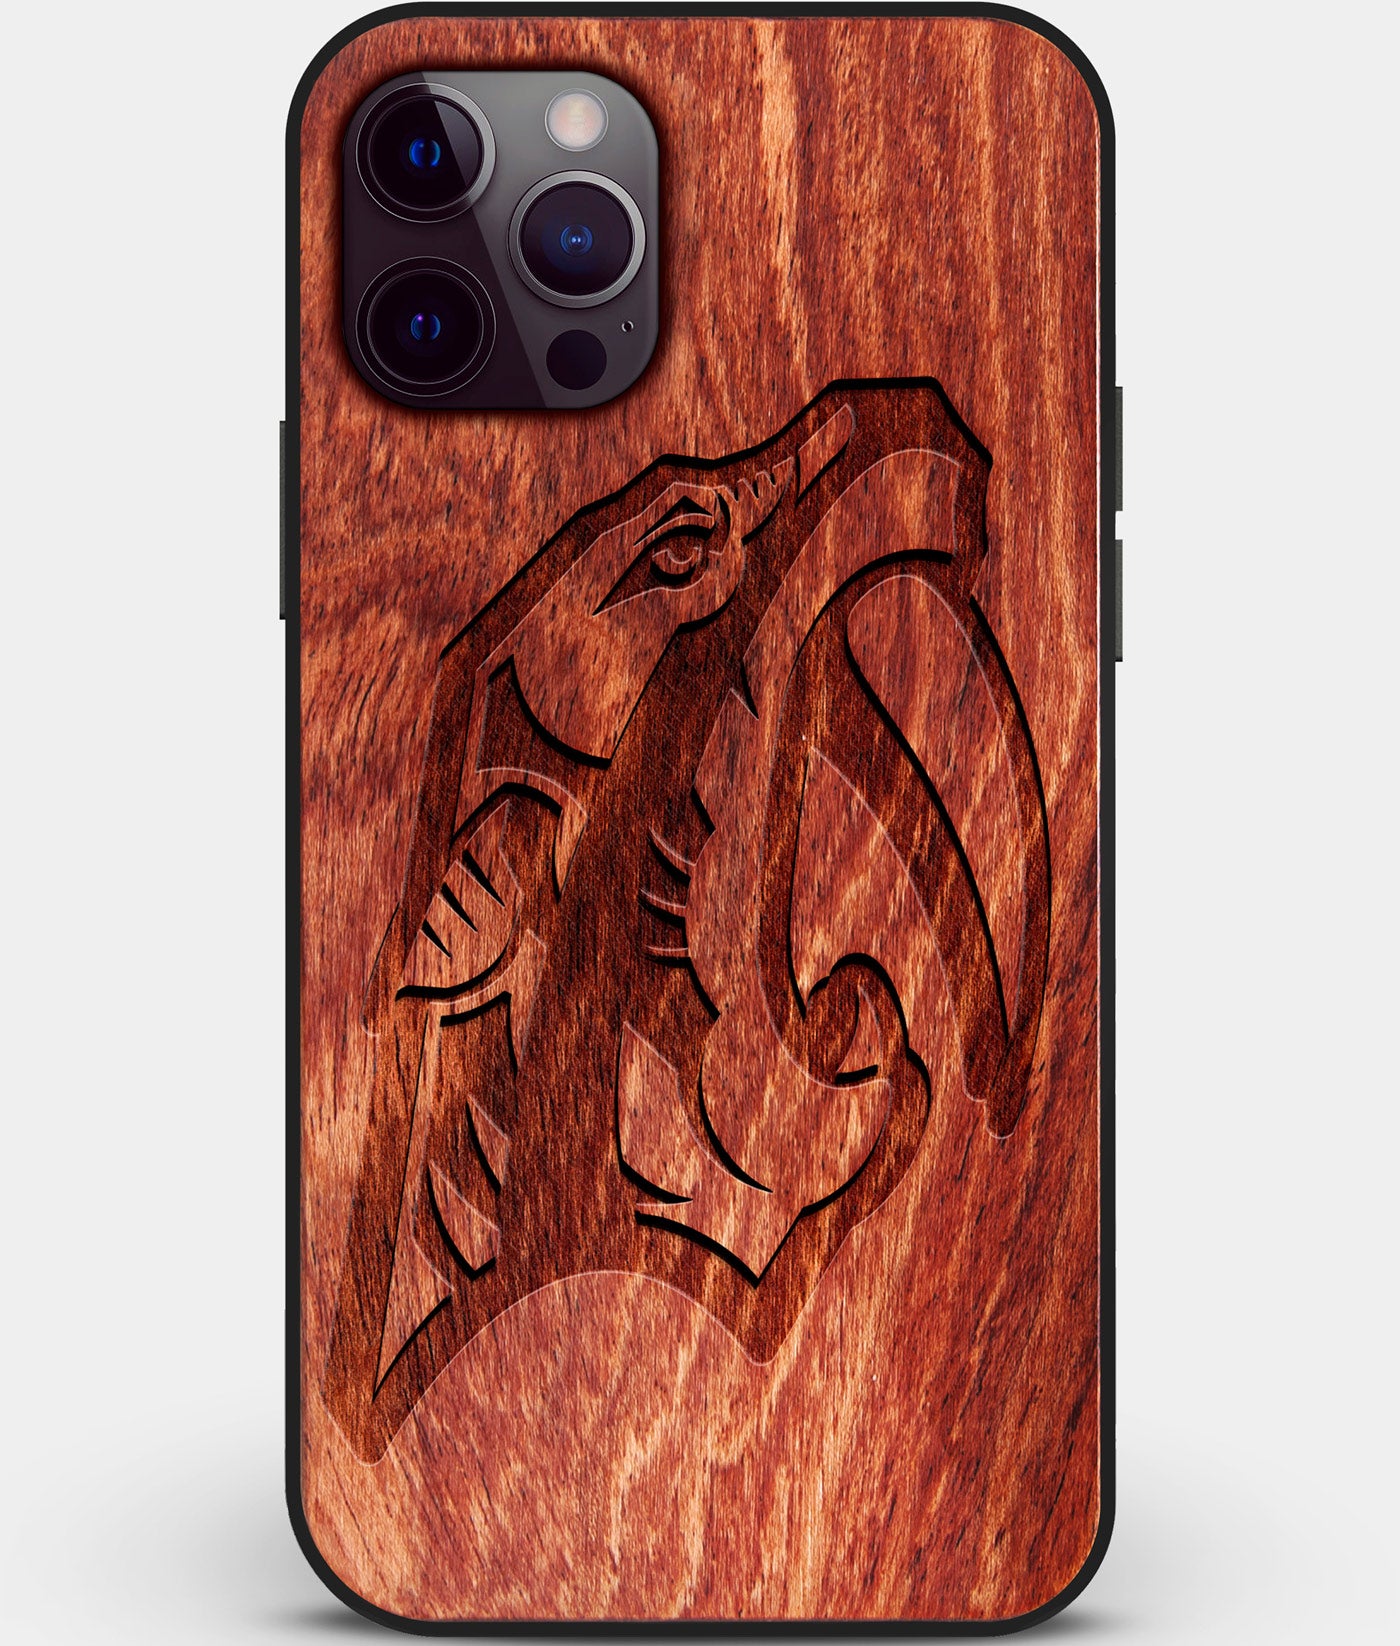 Custom Carved Wood Nashville Predators iPhone 12 Pro Case | Personalized Mahogany Wood Nashville Predators Cover, Birthday Gift, Gifts For Him, Monogrammed Gift For Fan | by Engraved In Nature